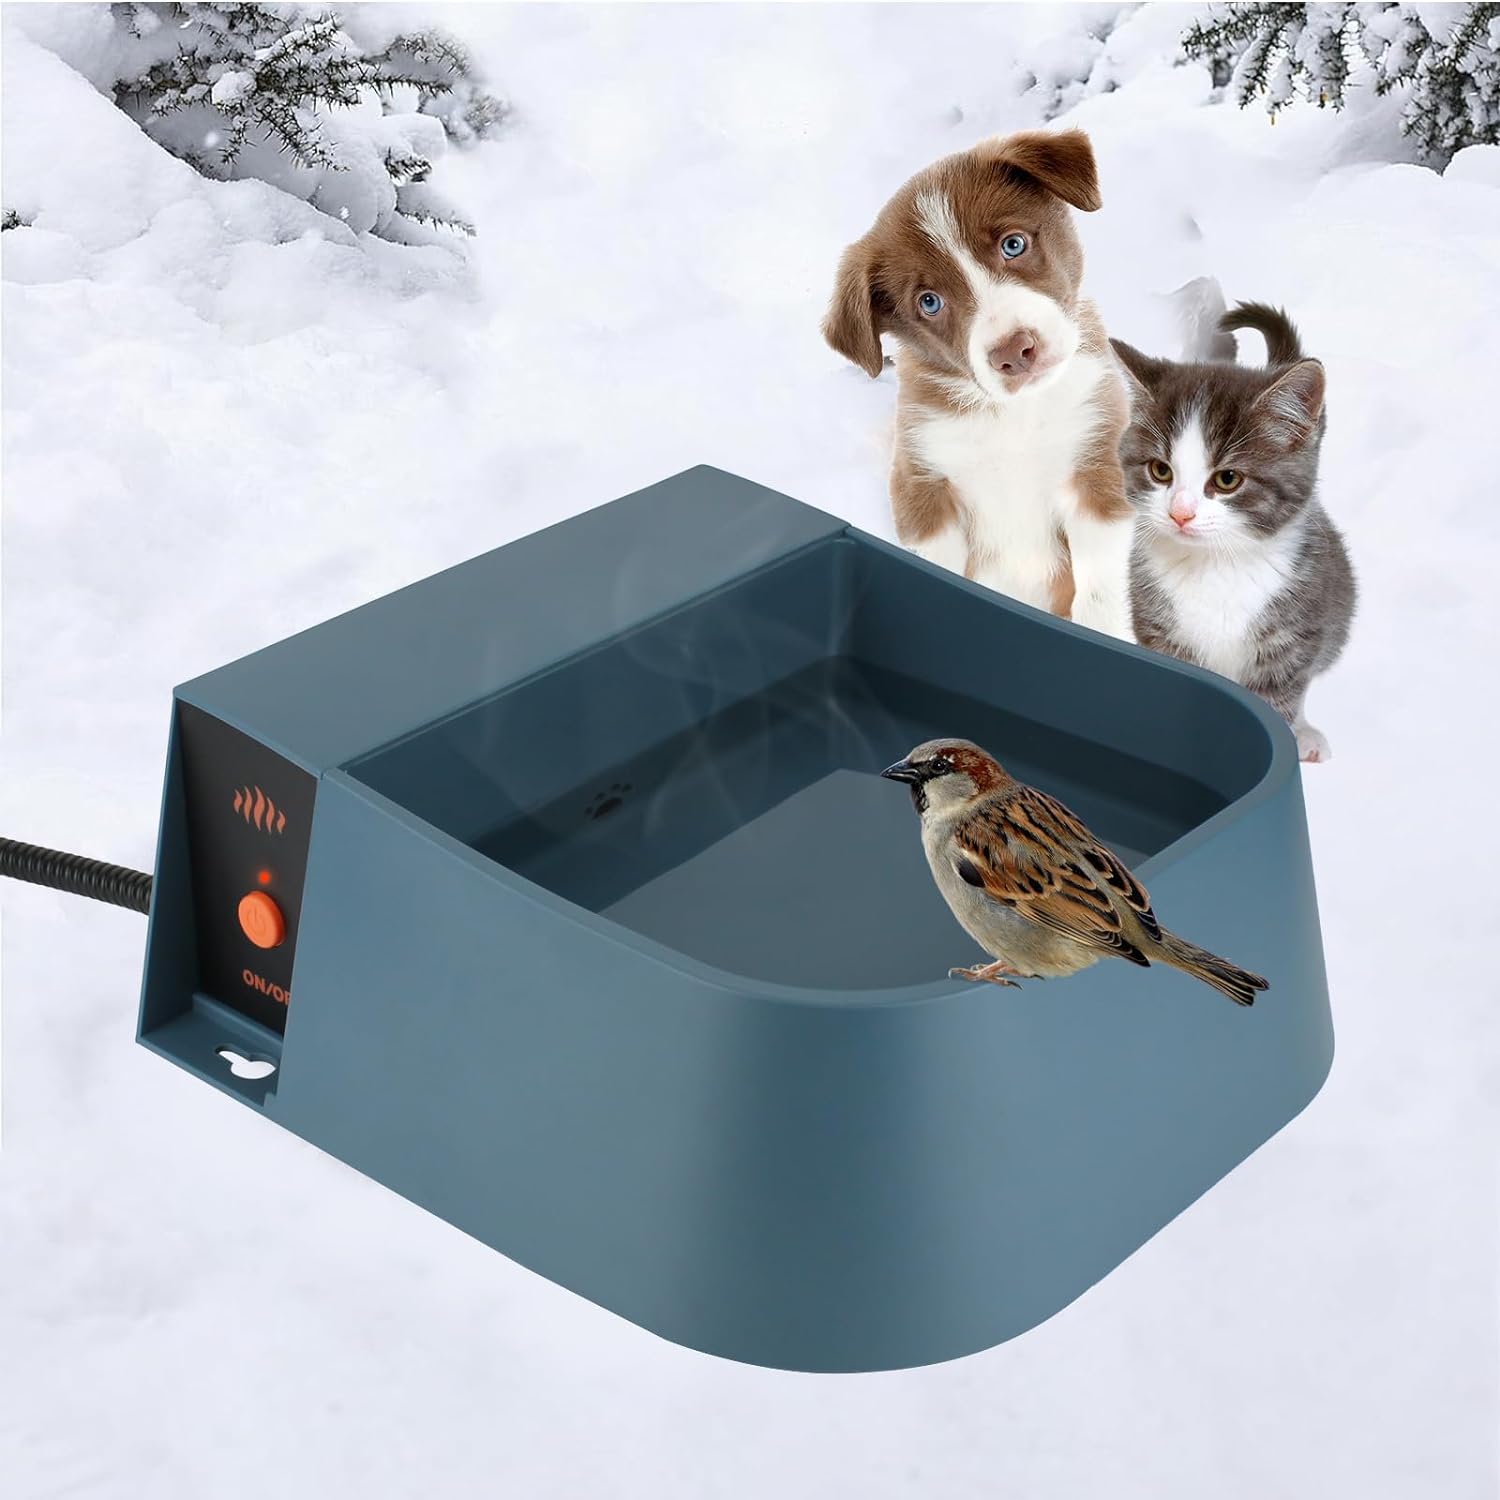 Heated Dog Water Bowl for Winter